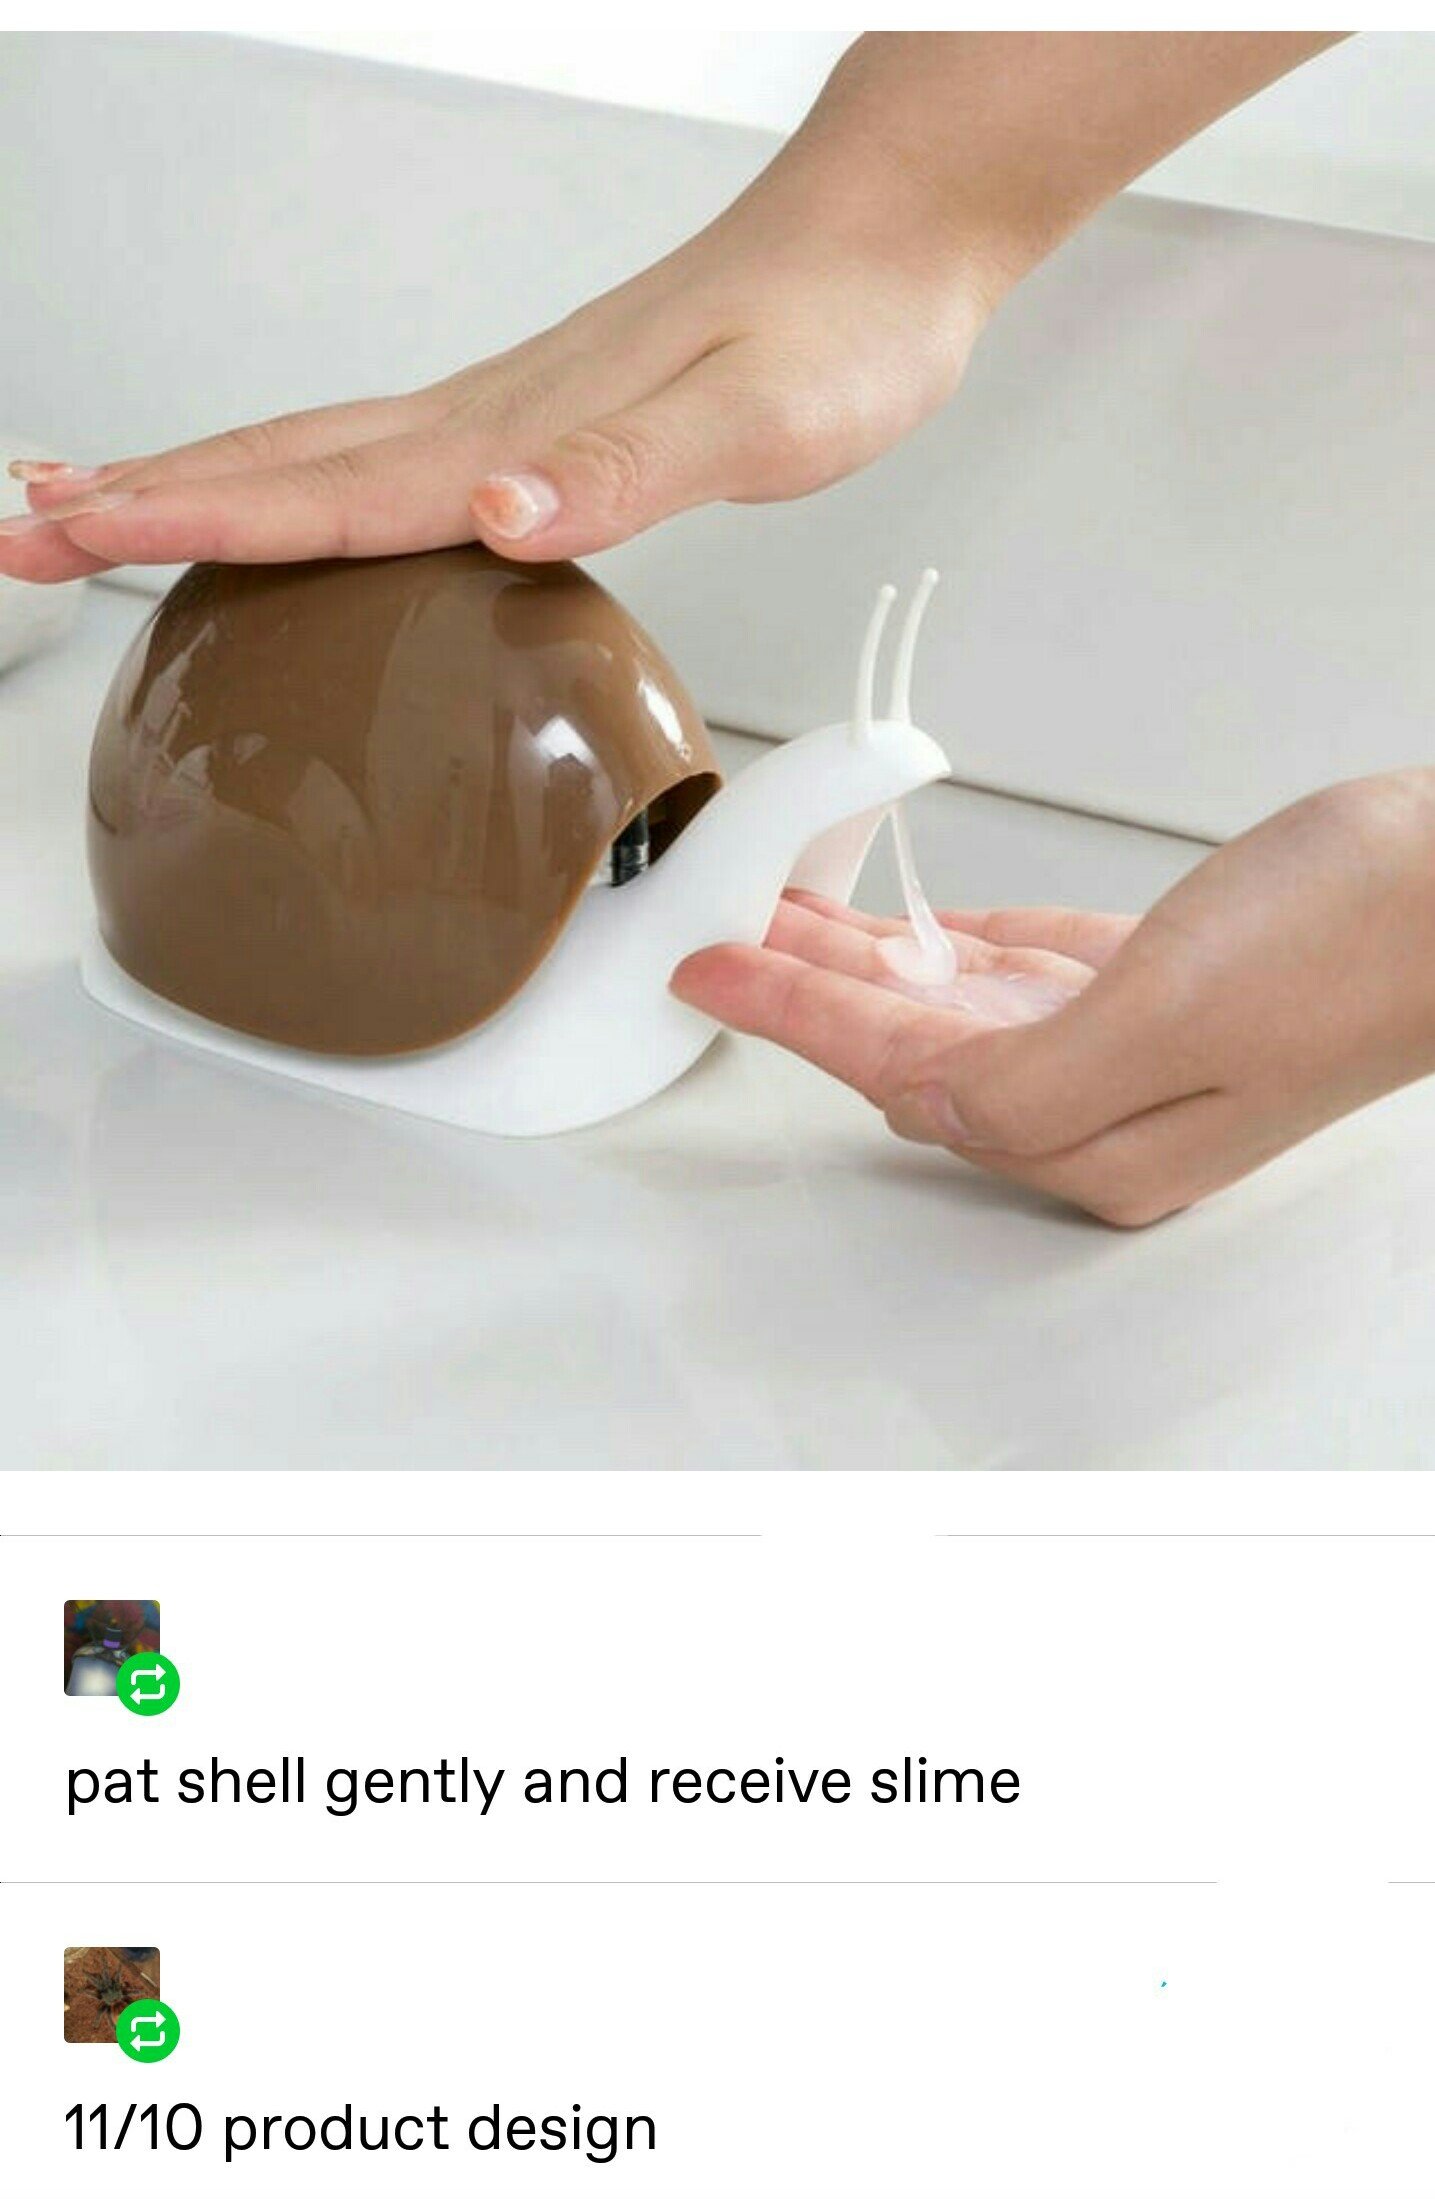 Shower gel - pat shell gently and receive slime 1110 product design